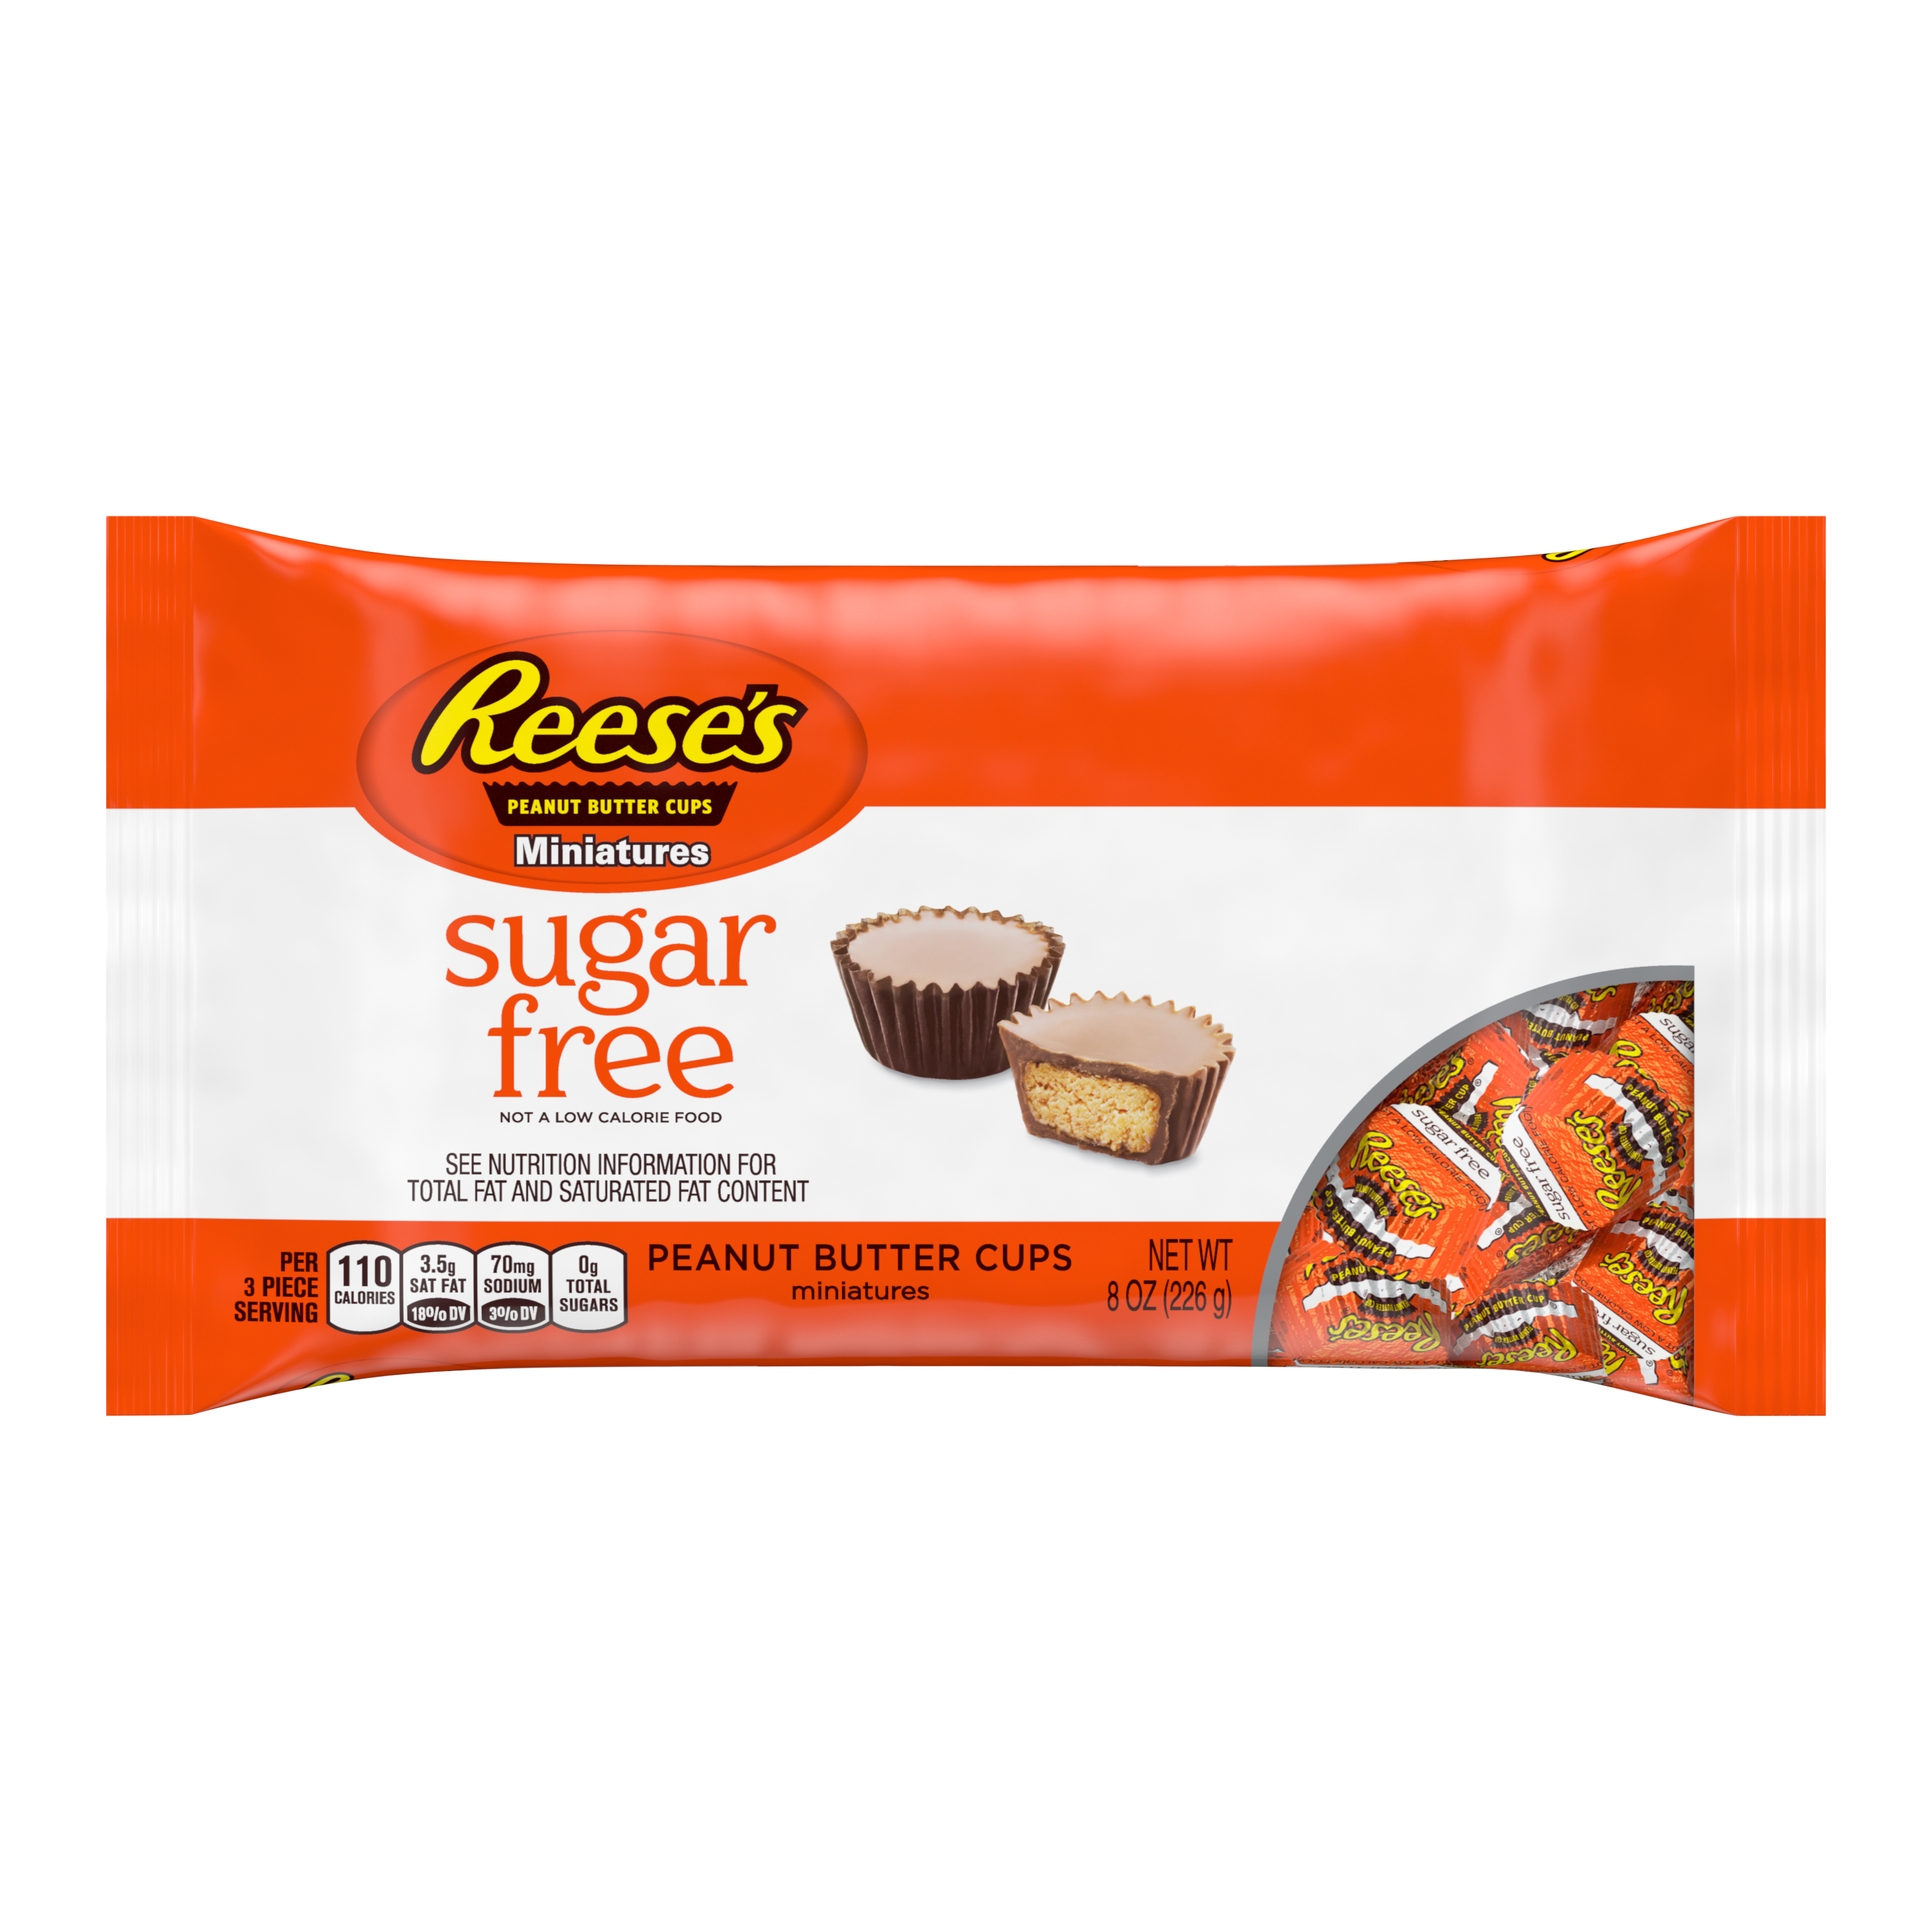 REESE'S Sugar Free Milk Chocolate Miniatures Peanut Butter Cups, 8 oz bag - Front of Package